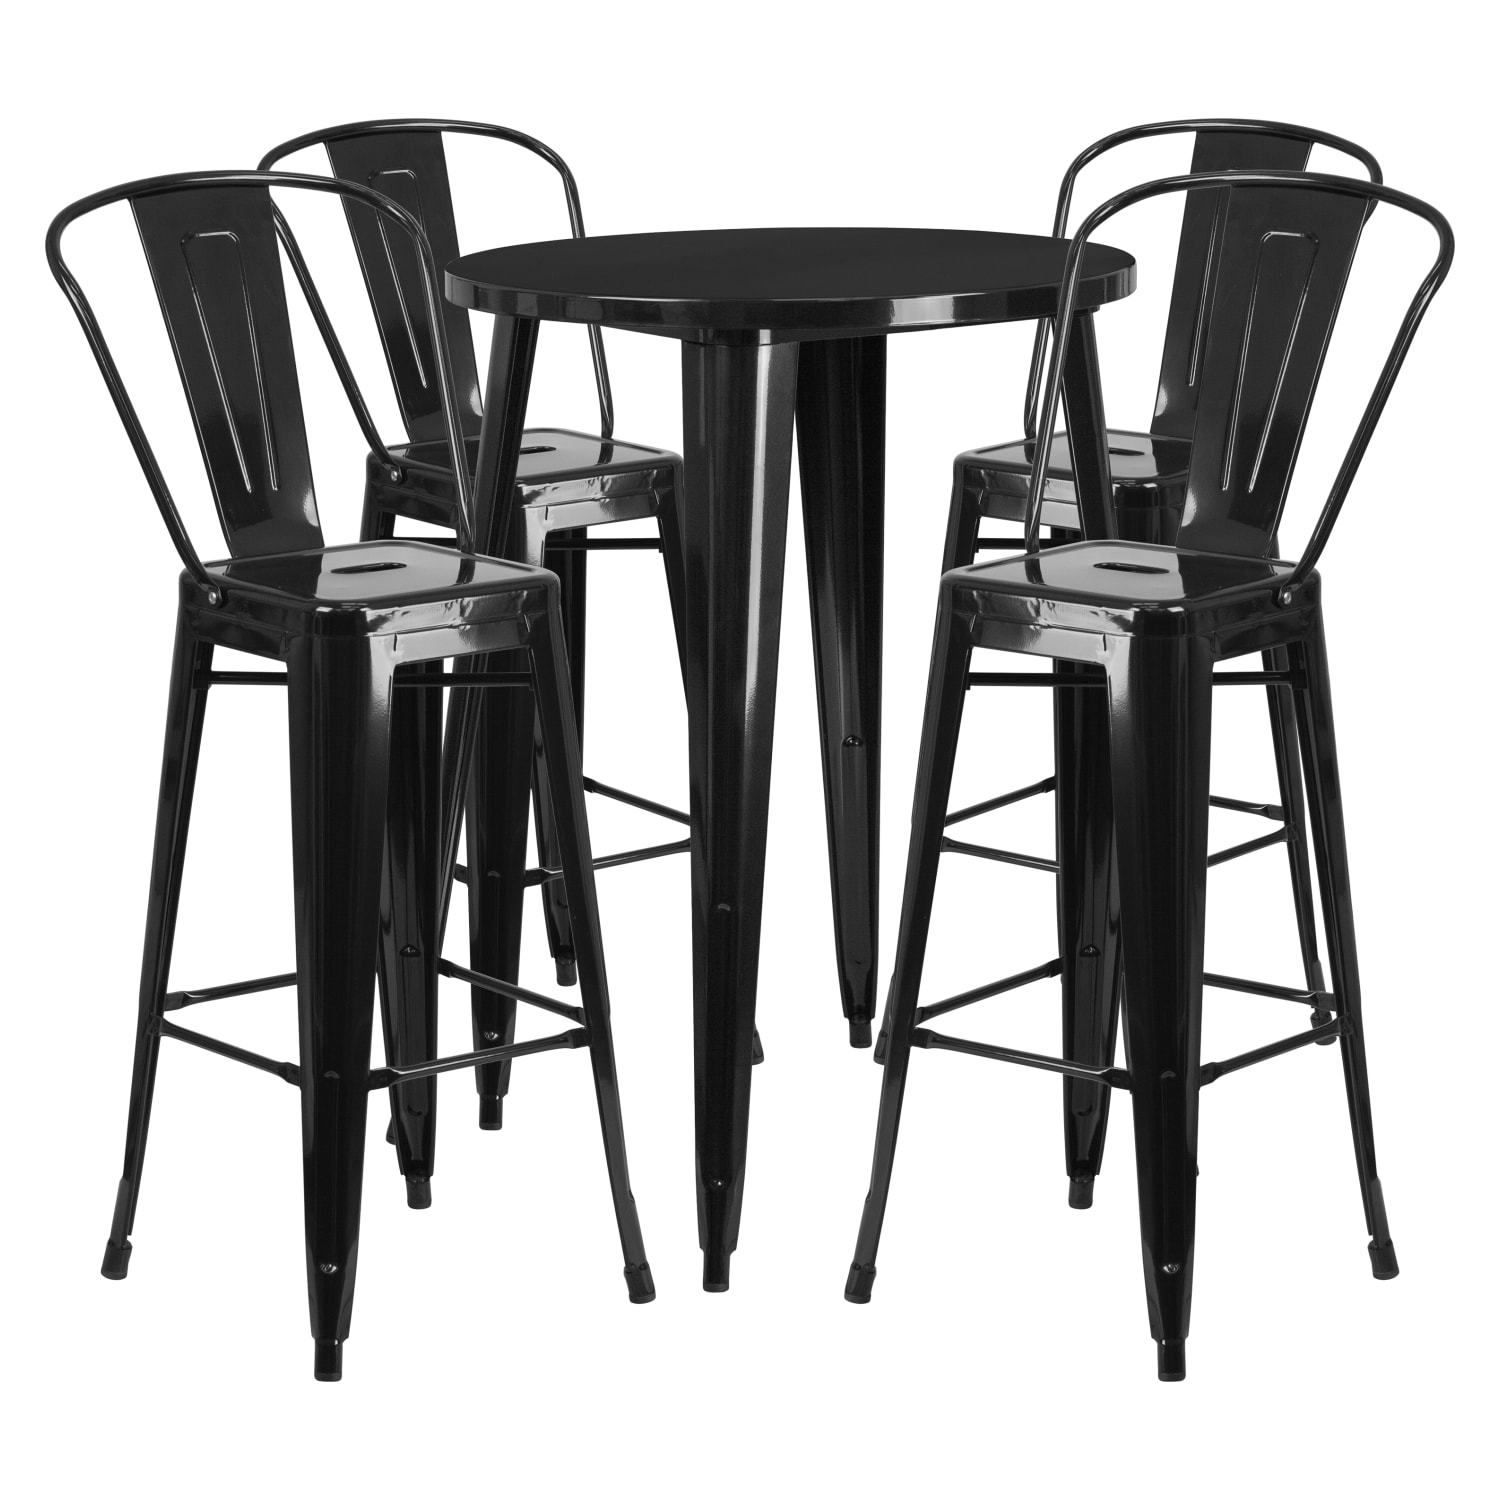 30” Round Black Metal Indoor-Outdoor Bar Table Set with 4 Cafe Stools